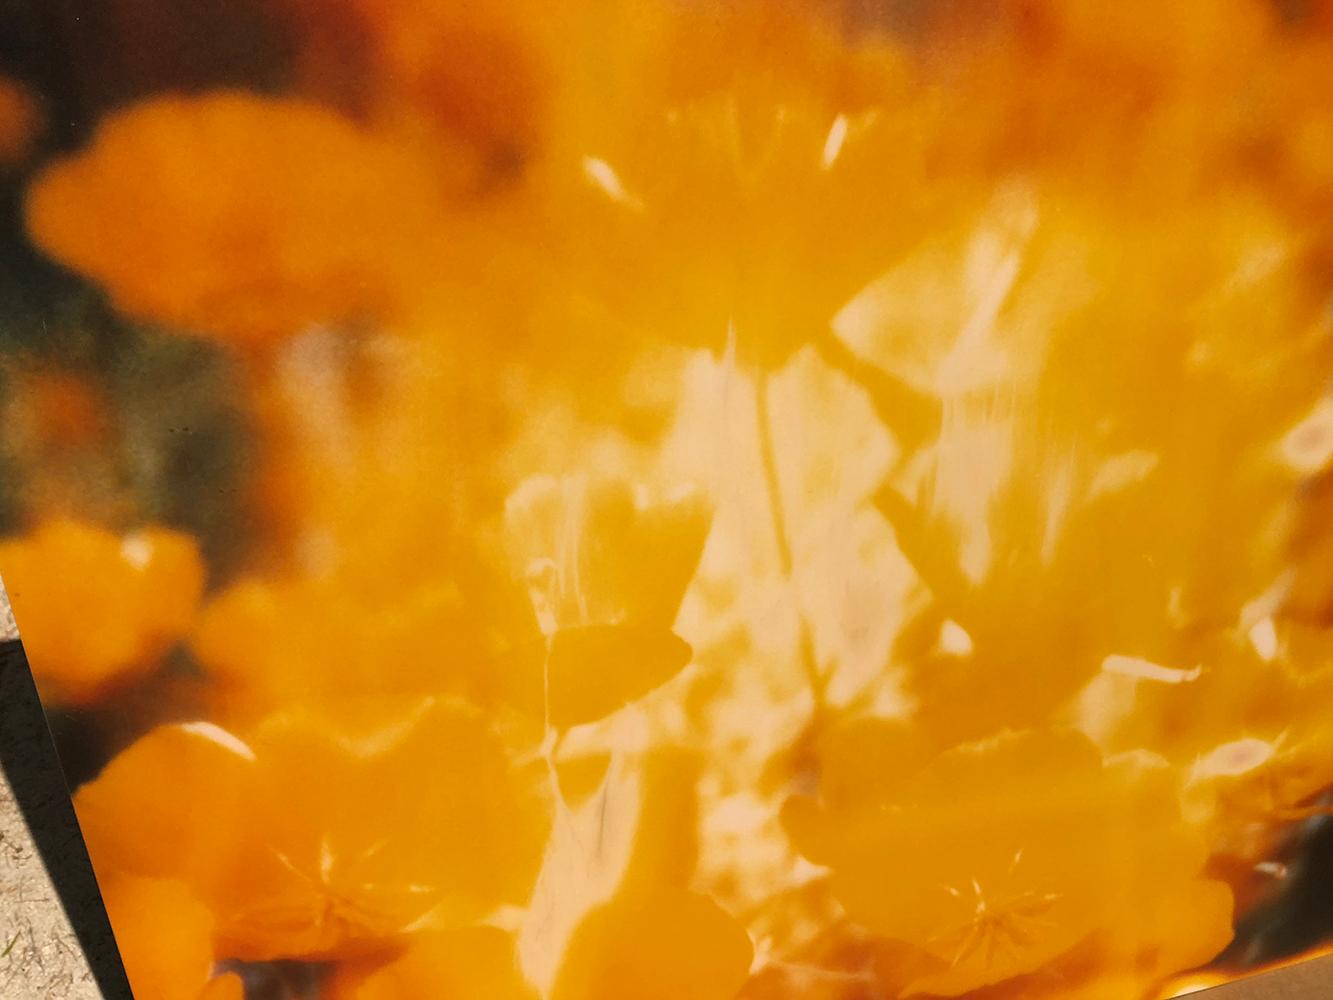 Yellow Flower (The Last Picture Show) - analog, 128x126cm, mounted - Contemporary Photograph by Stefanie Schneider